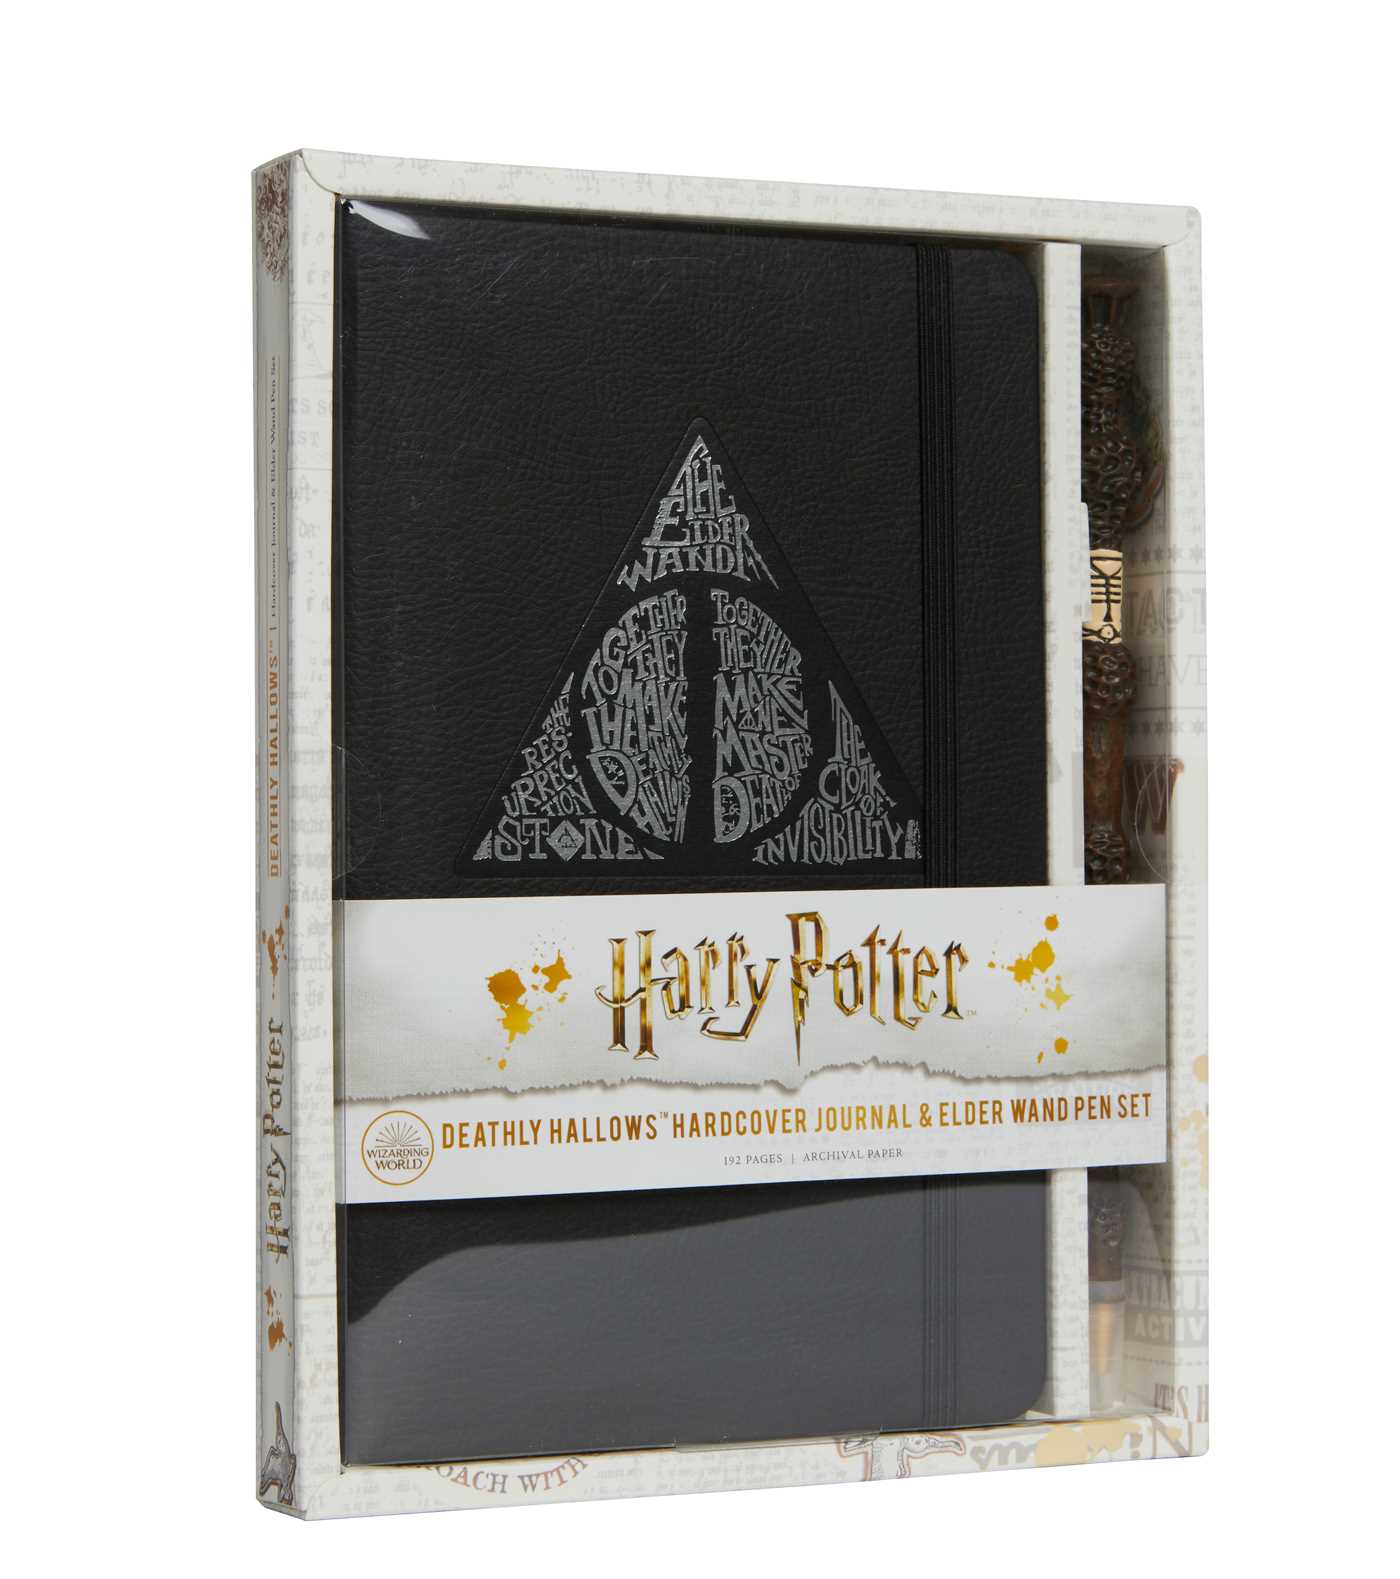 Harry Potter: Deathly Hallows Hardcover Journal and Elder Wand Pen Set | Papeterie fine